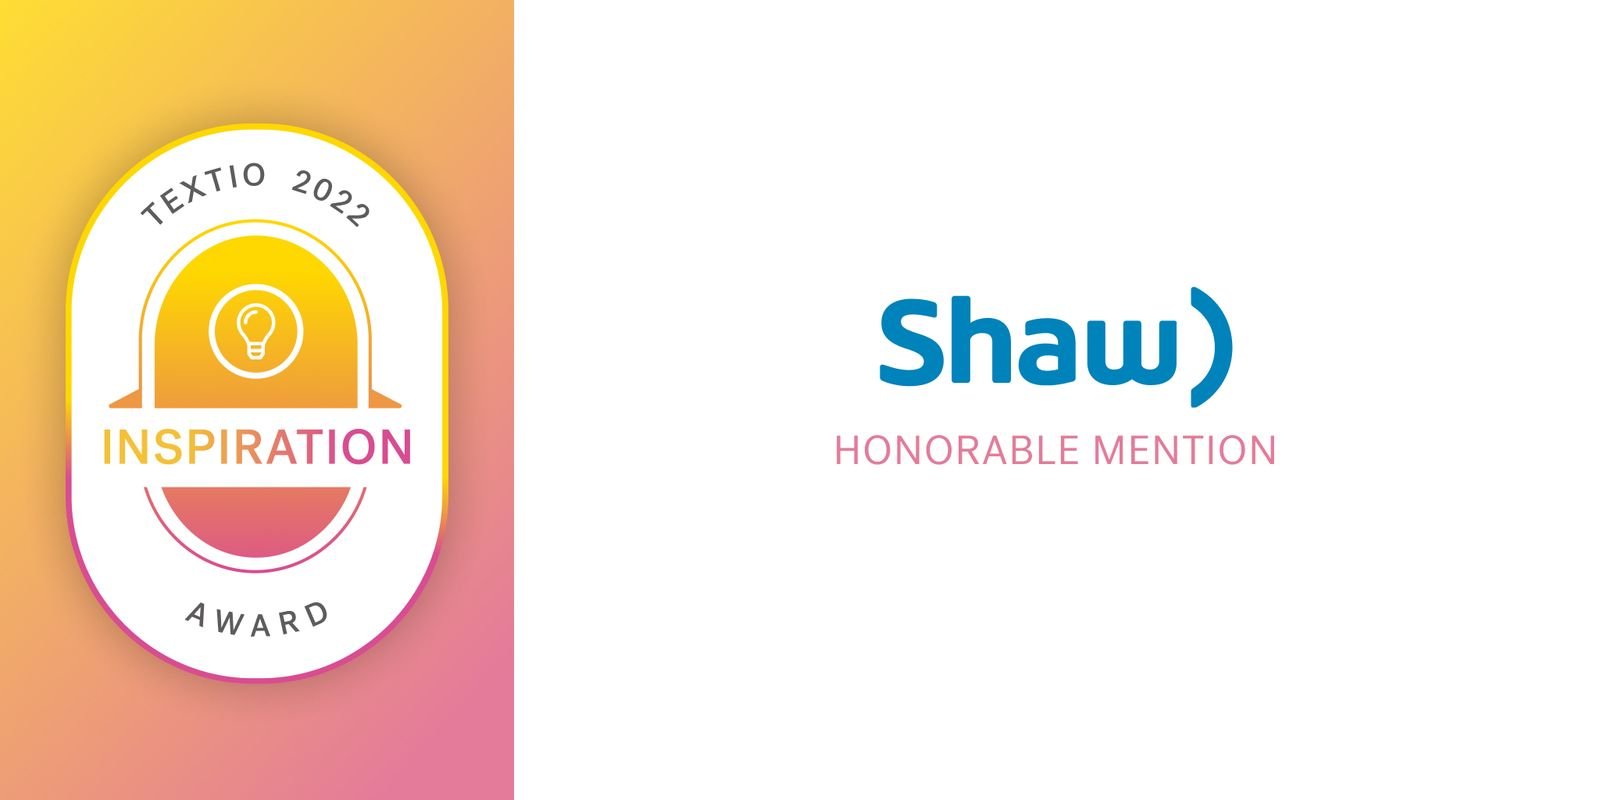 Graphic of Textio Inspiration Award badge on left and Shaw Communications logo on right with text underneath that reads "Honorable Mention"